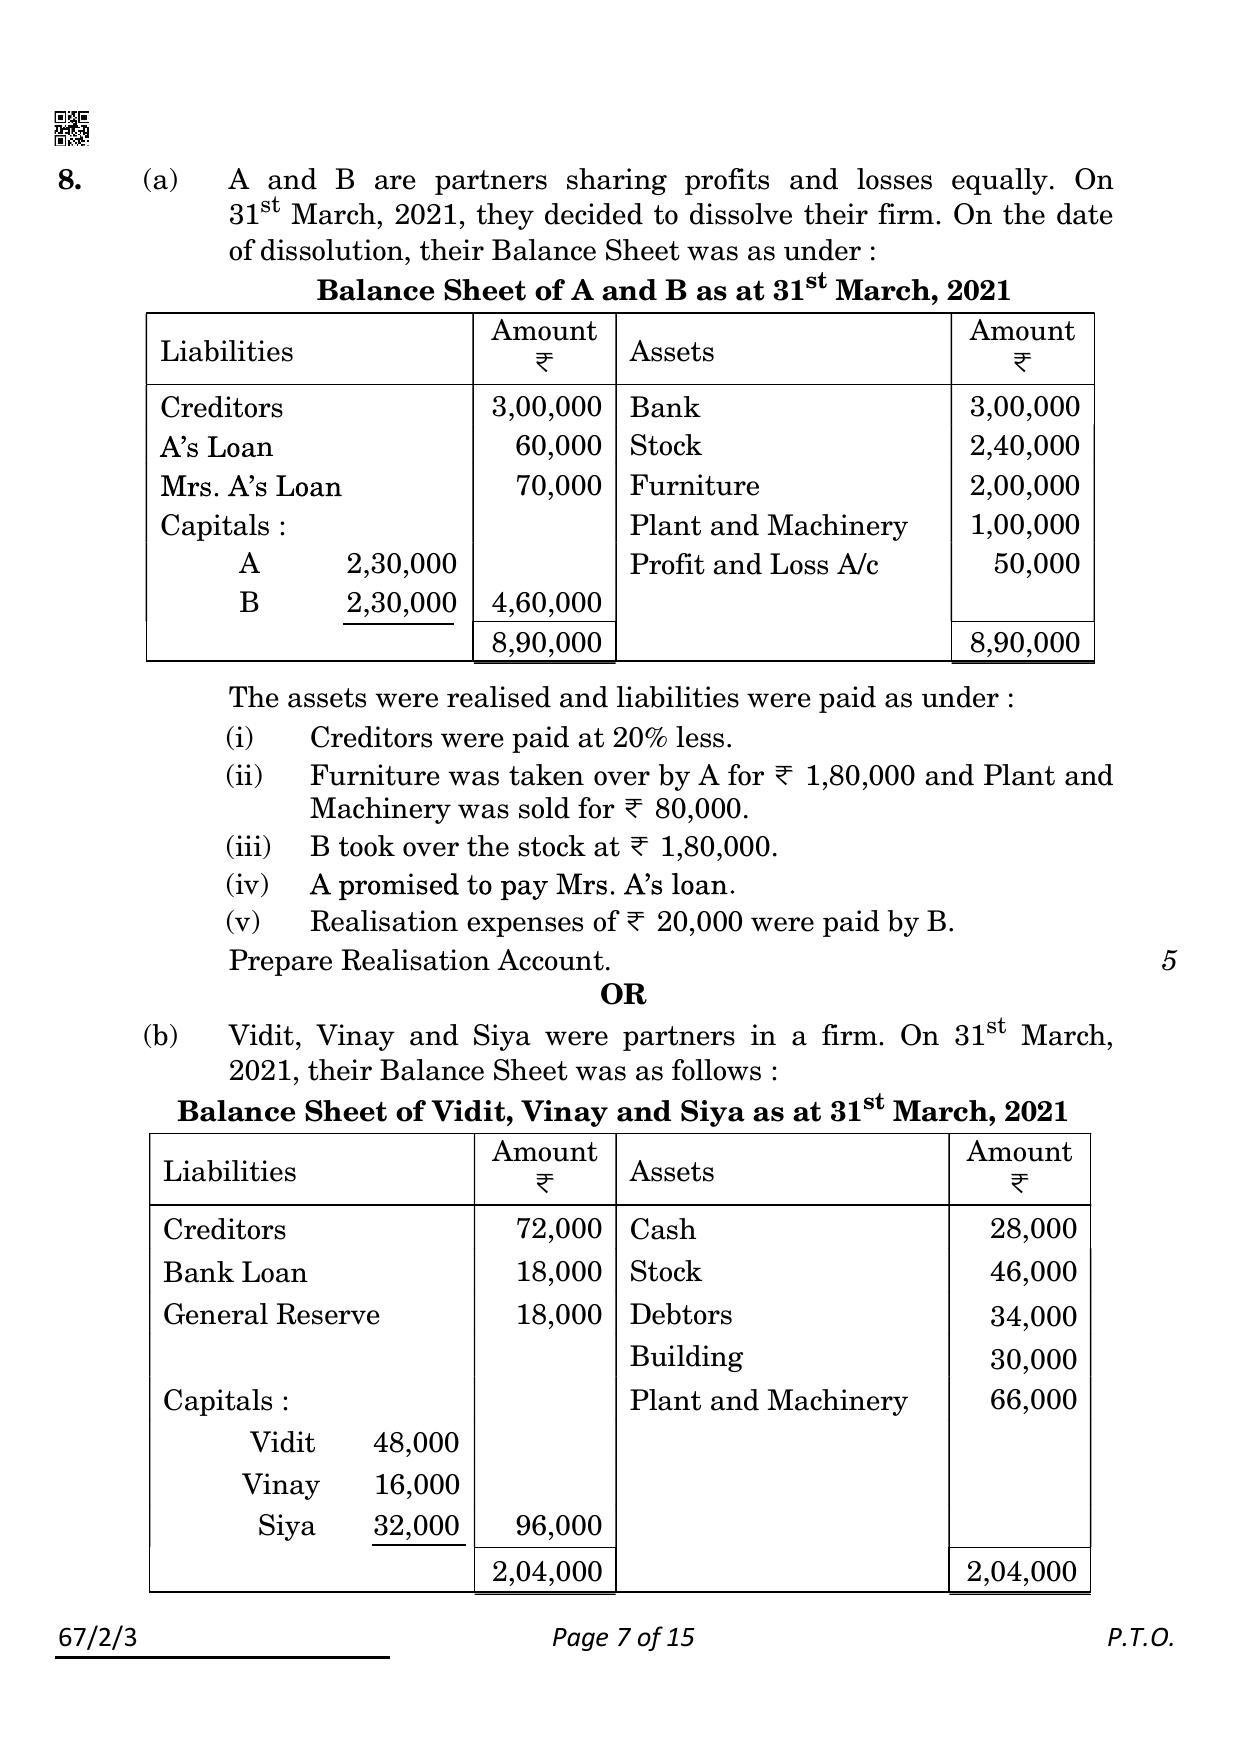 CBSE Class 12 67-2-3 Accountancy 2022 Question Paper - Page 7